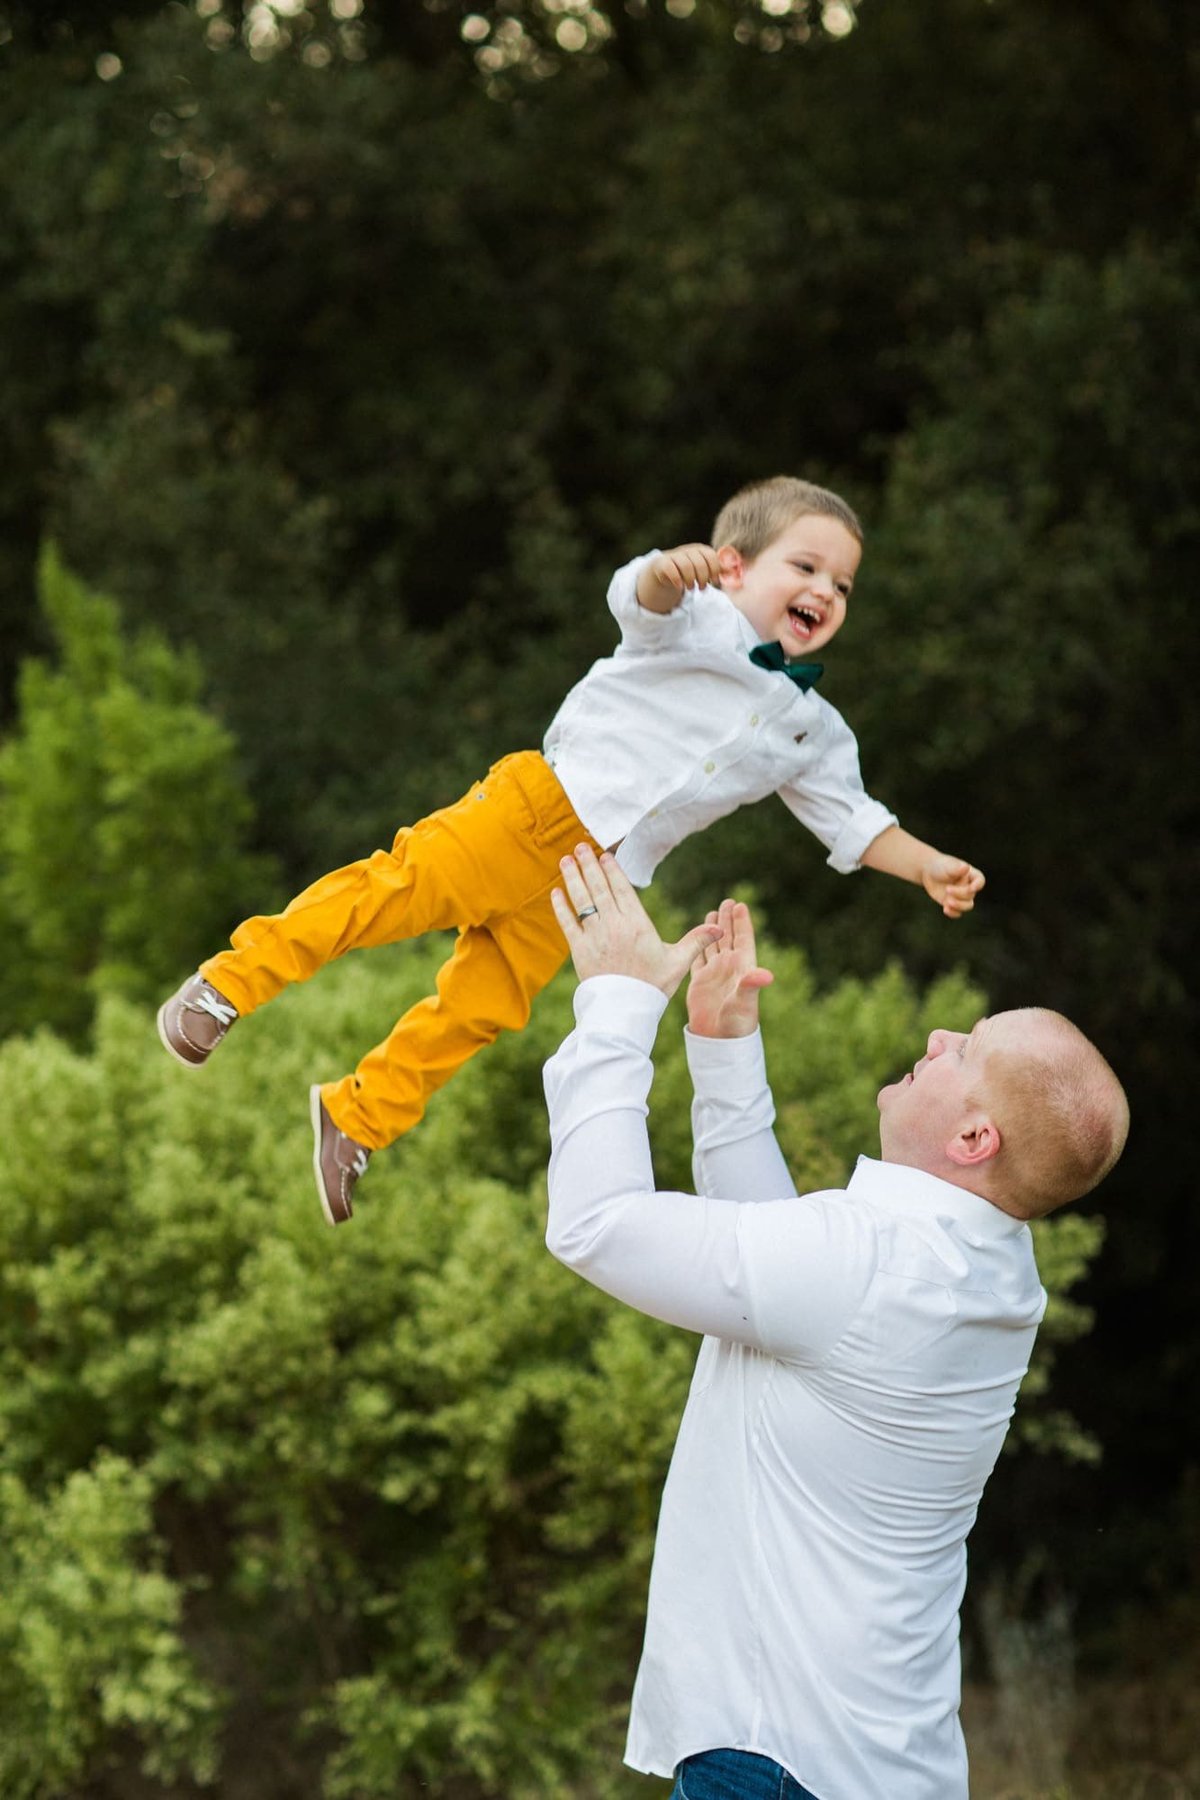 Father tosses his young son in the air before catching him as the little boy gives a big smile